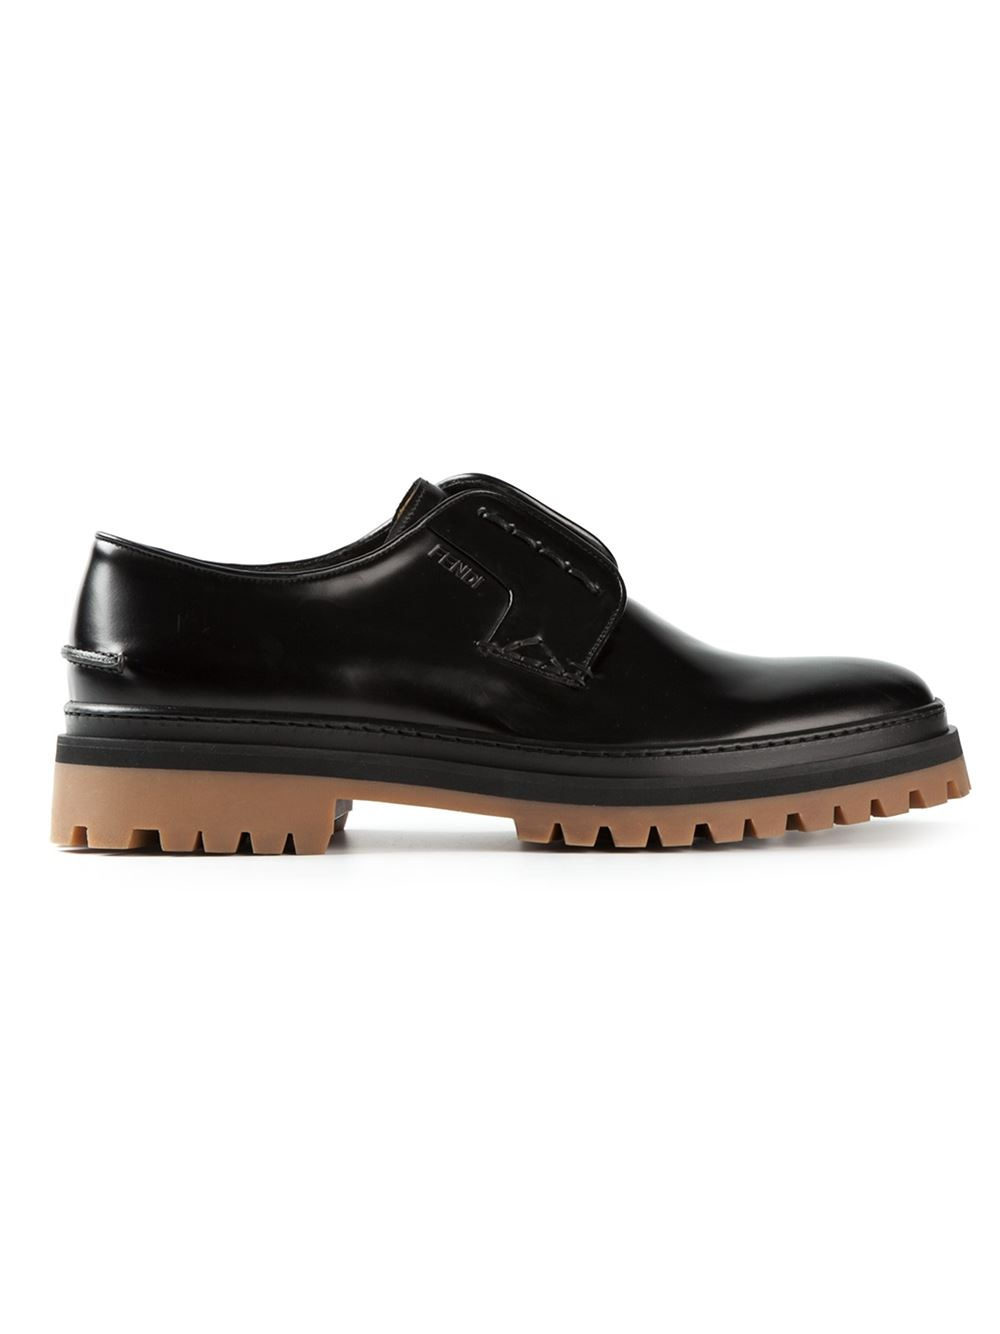 Fendi Chunky Laceless Derby Shoes in Black for Men - Lyst